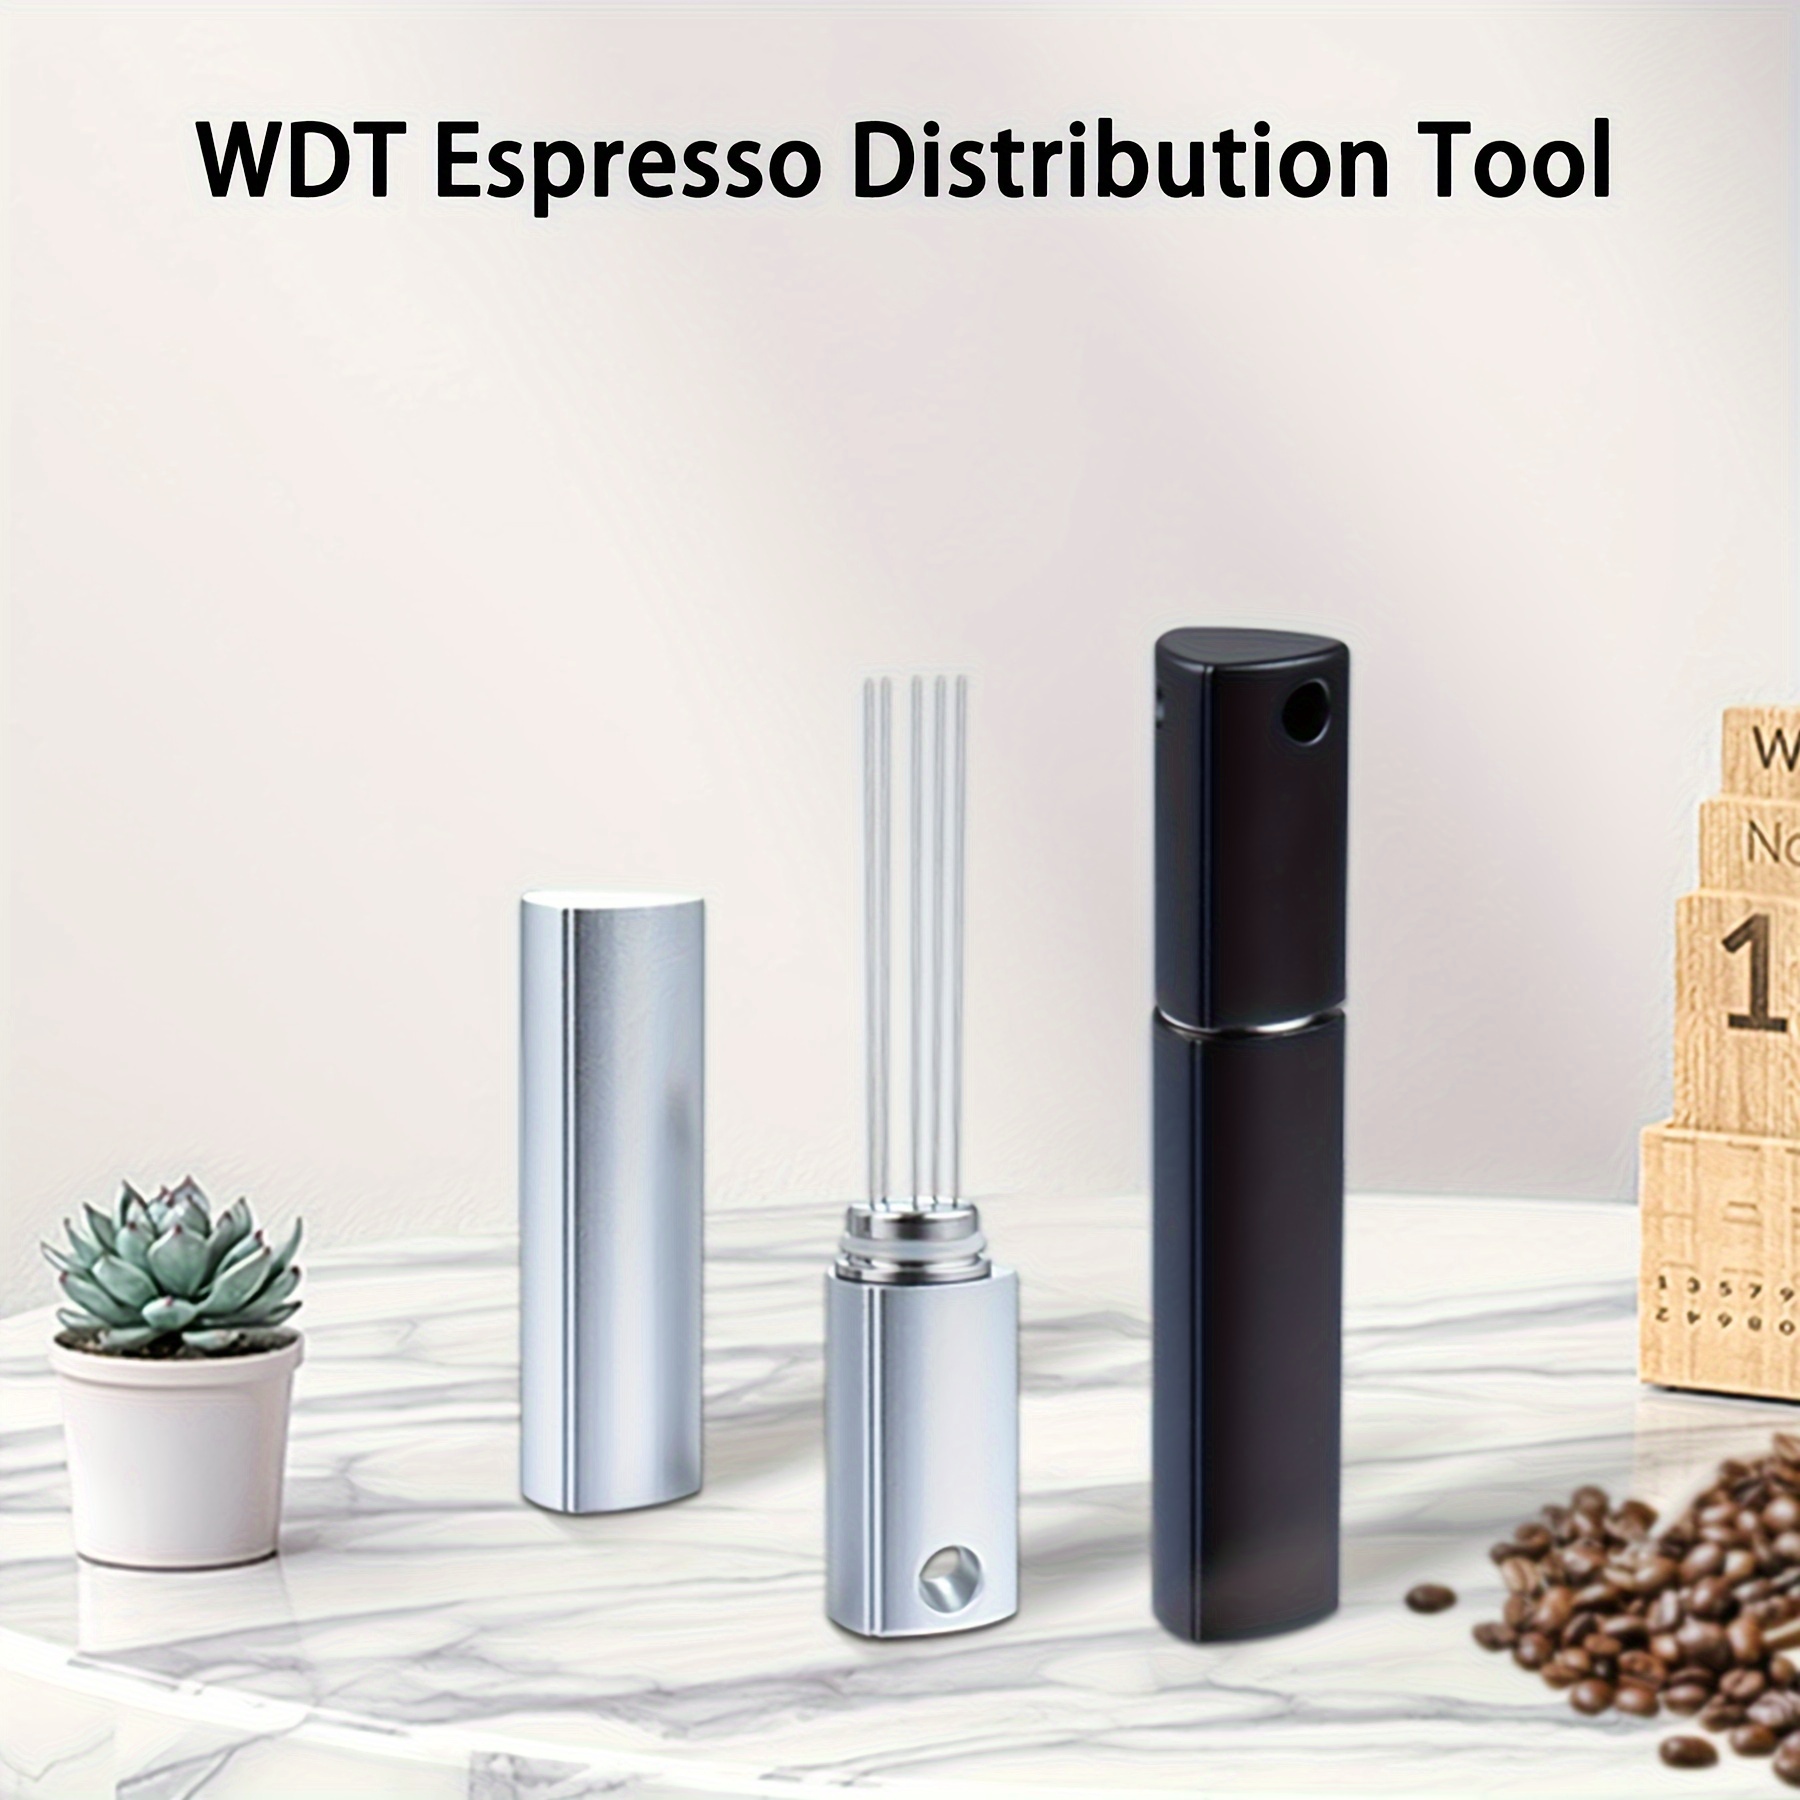 WDT Espresso Distribution Tool, Espresso Coffee Stirrer,0.4mm 6 Needles Espresso  Stirrer for Barista,Aluminum Handle and Stand,Replaceable Needles(Silver) 